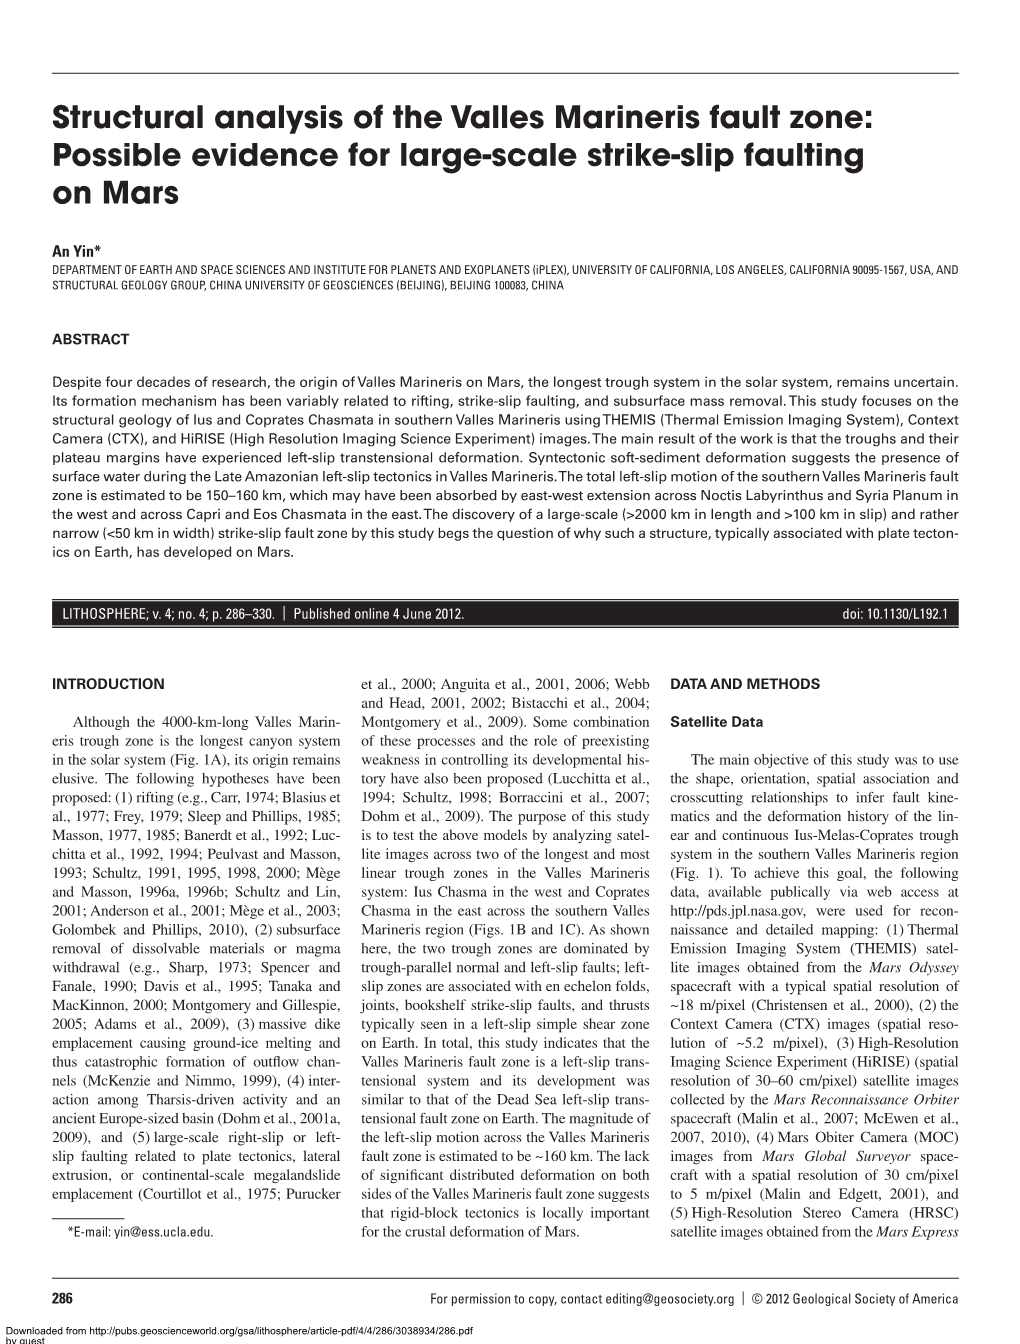 Structural Analysis of the Valles Marineris Fault Zone: Possible Evidence for Large-Scale Strike-Slip Faulting on Mars